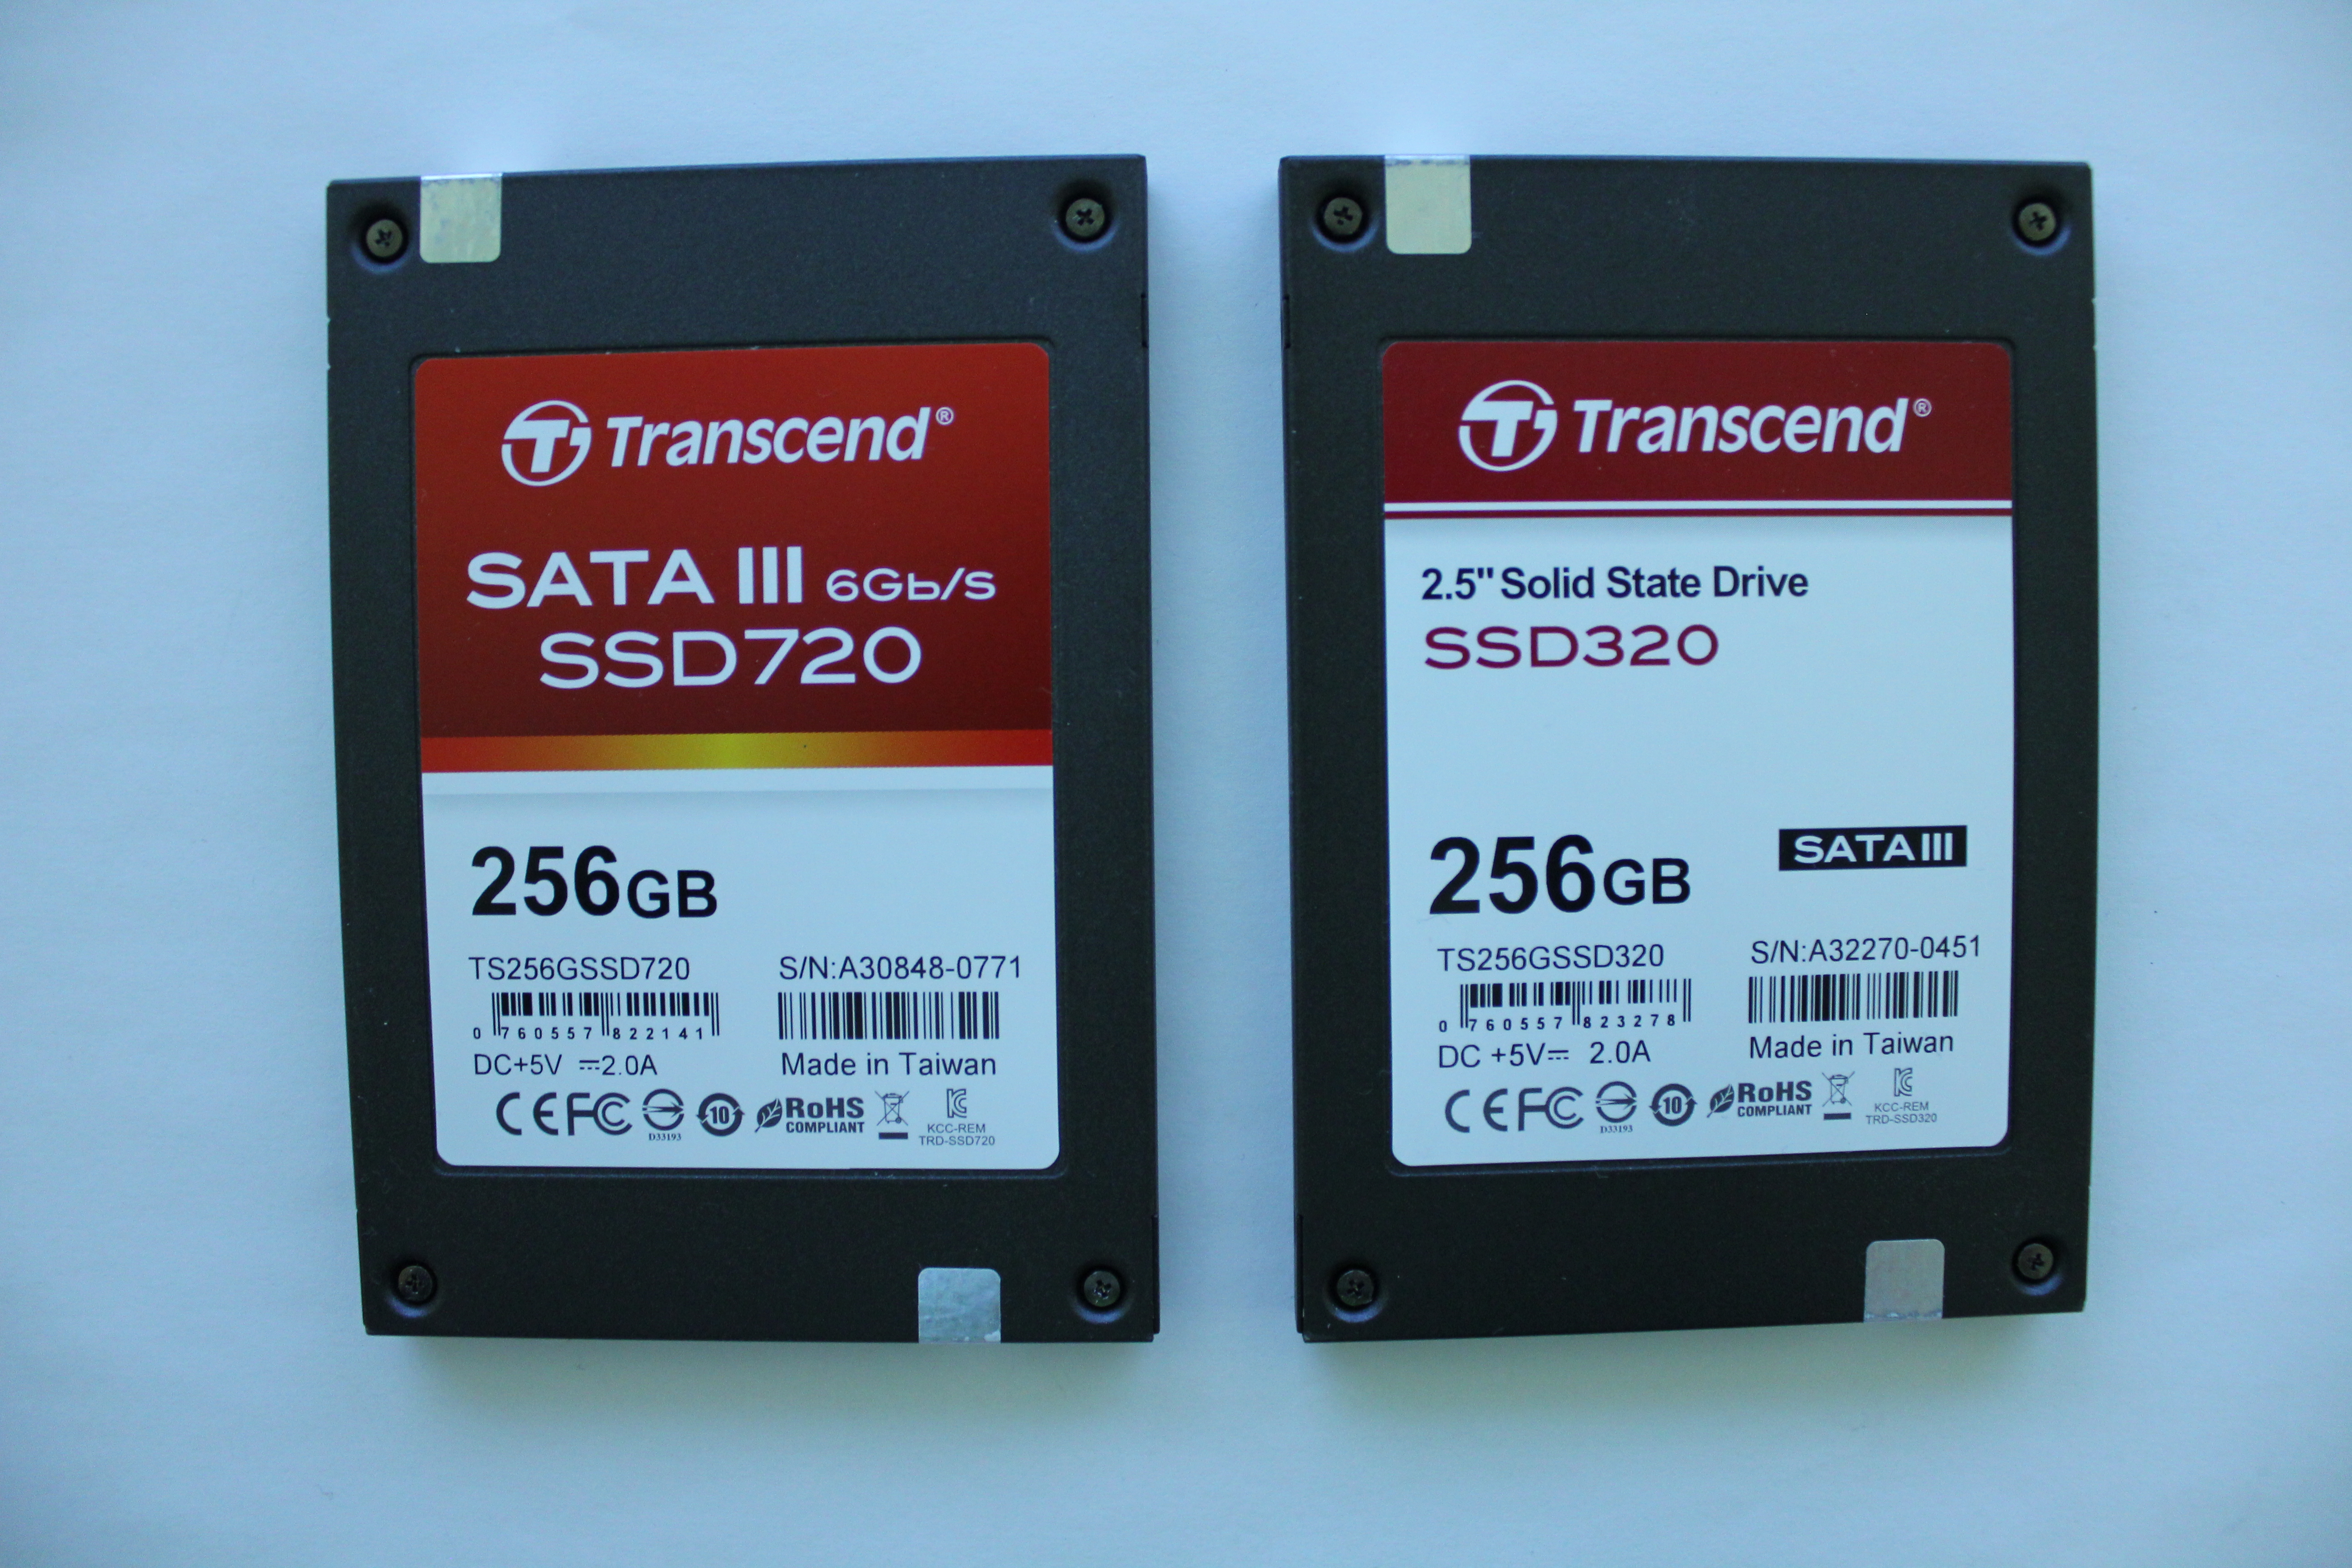 The Drives and Transcend's SSD Toolbox - Transcend SSD320 & SSD720